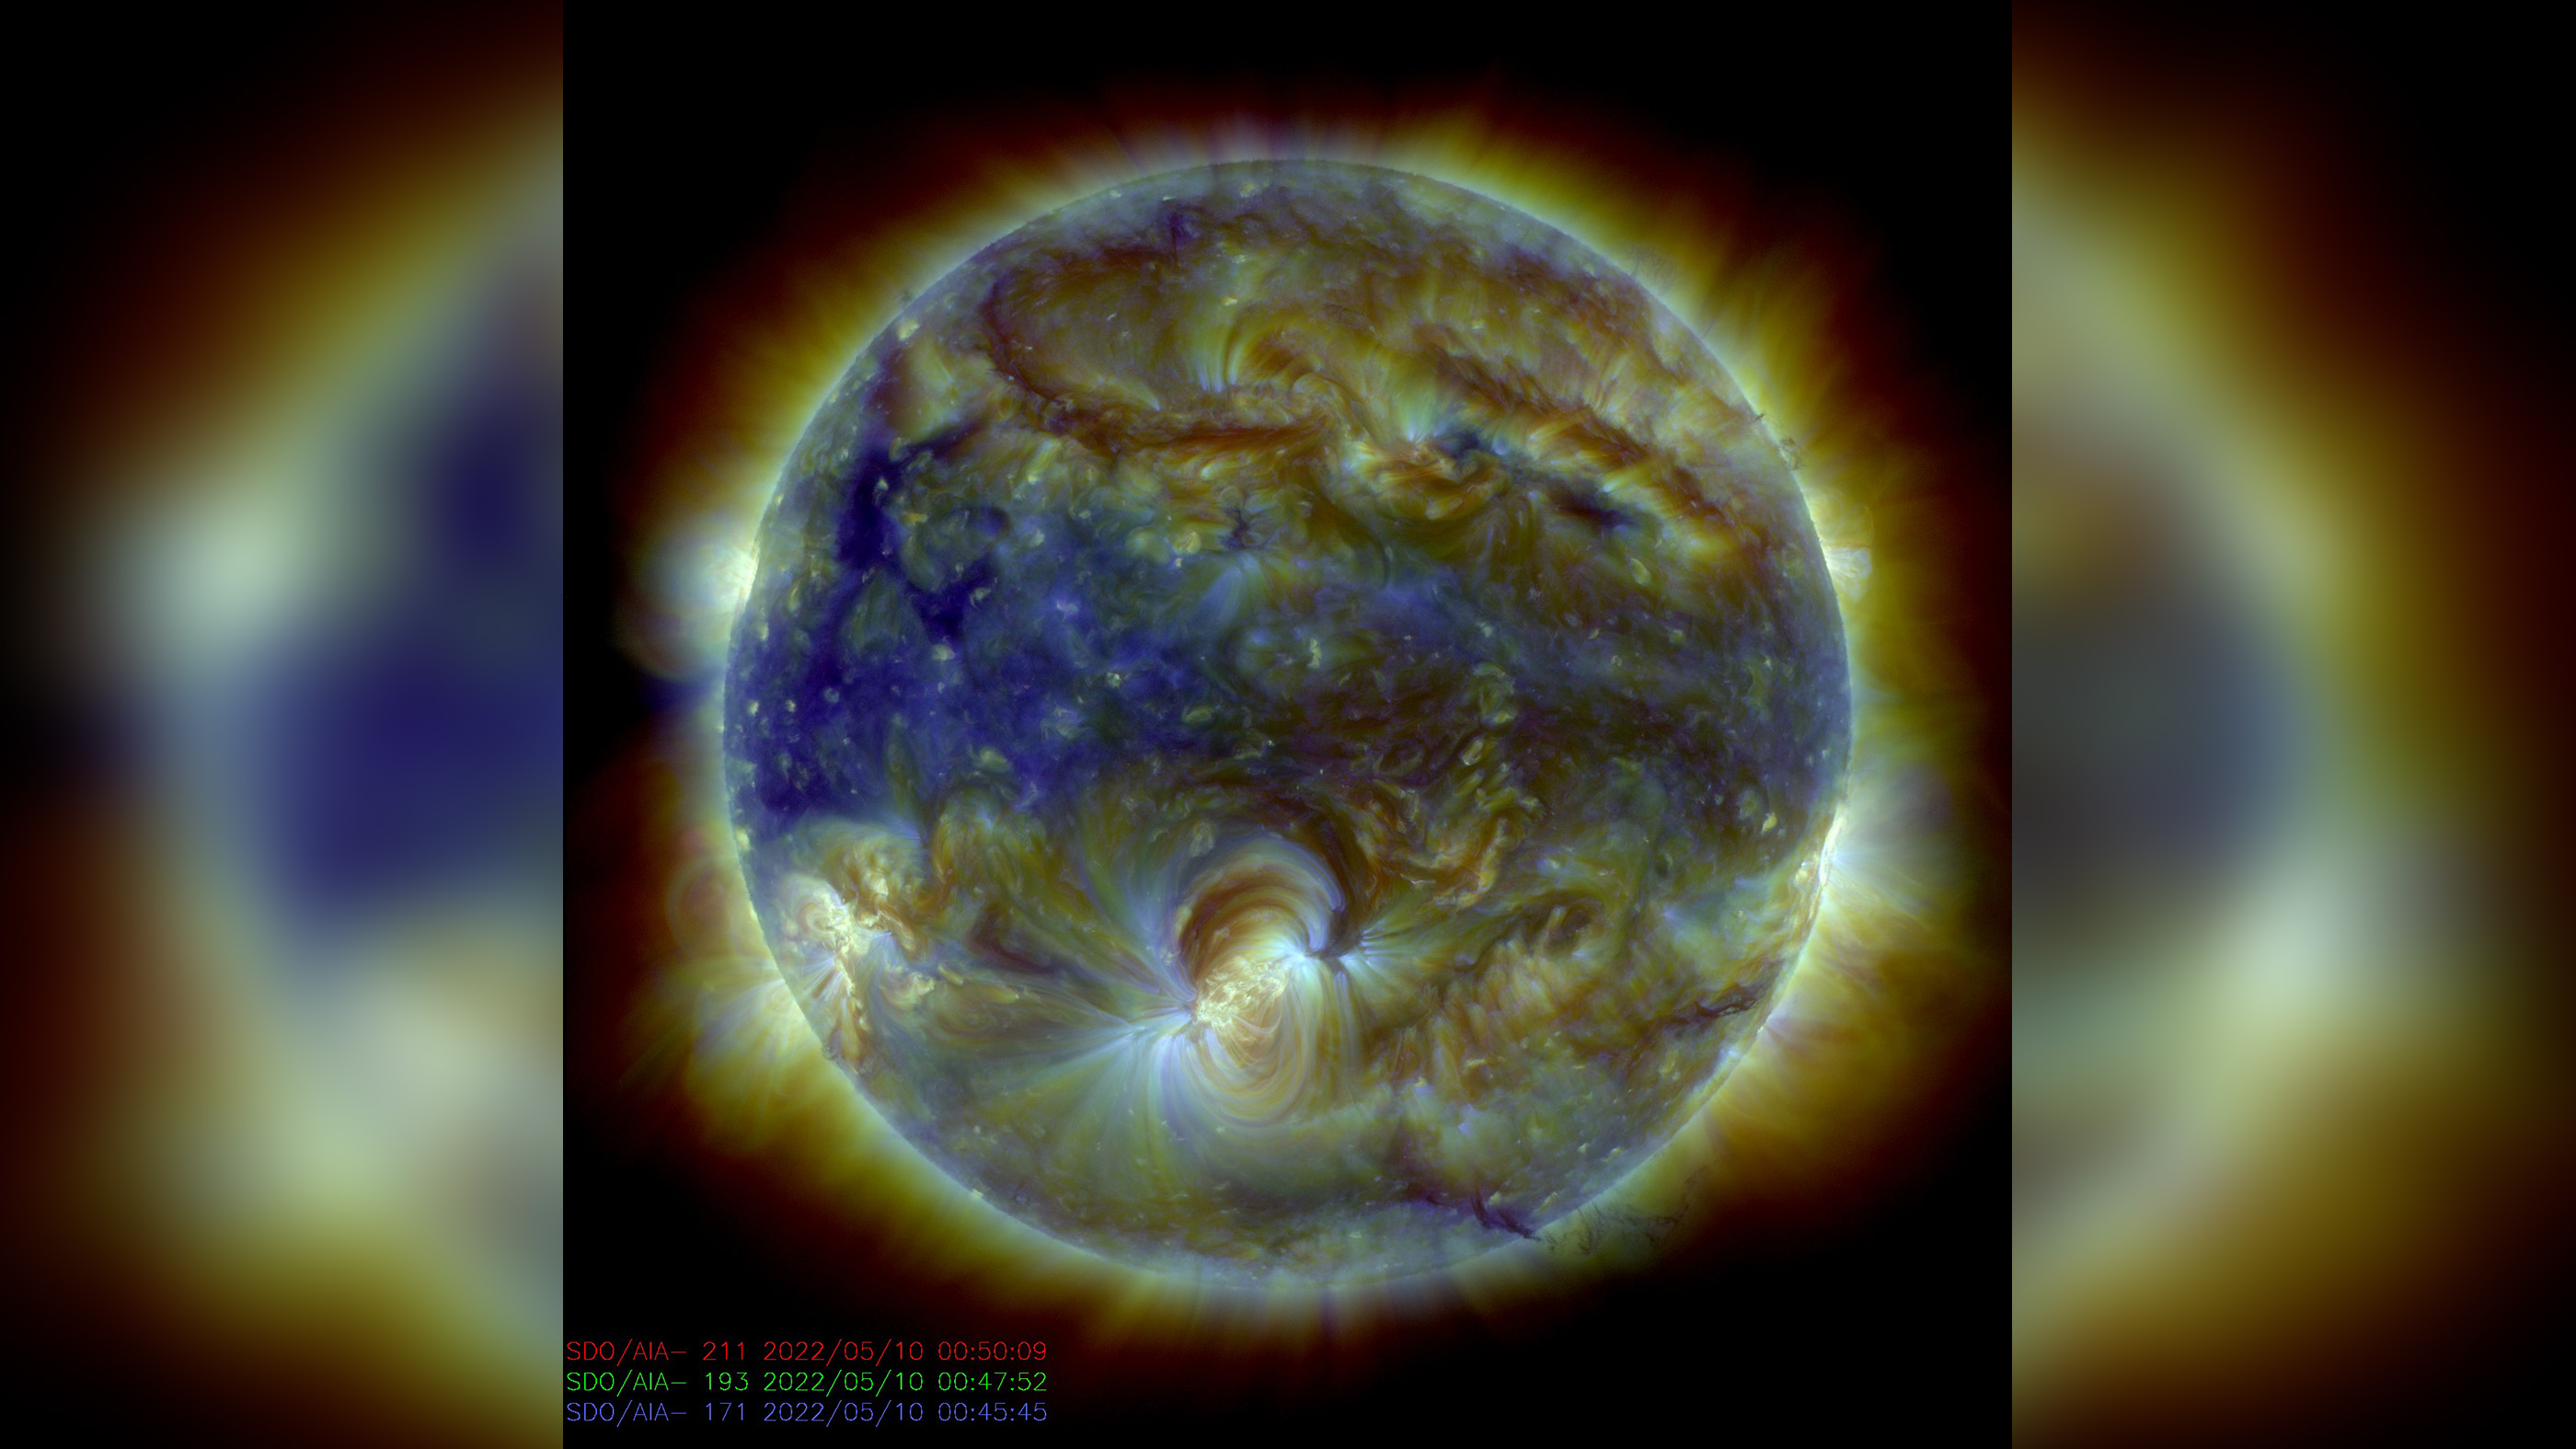 NASA's Solar Dynamics Observatory recorded this composite photograph of the sun at about the same time as the powerful solar flare occurred. AR3006 is visible in the lower center of the sun's disk.